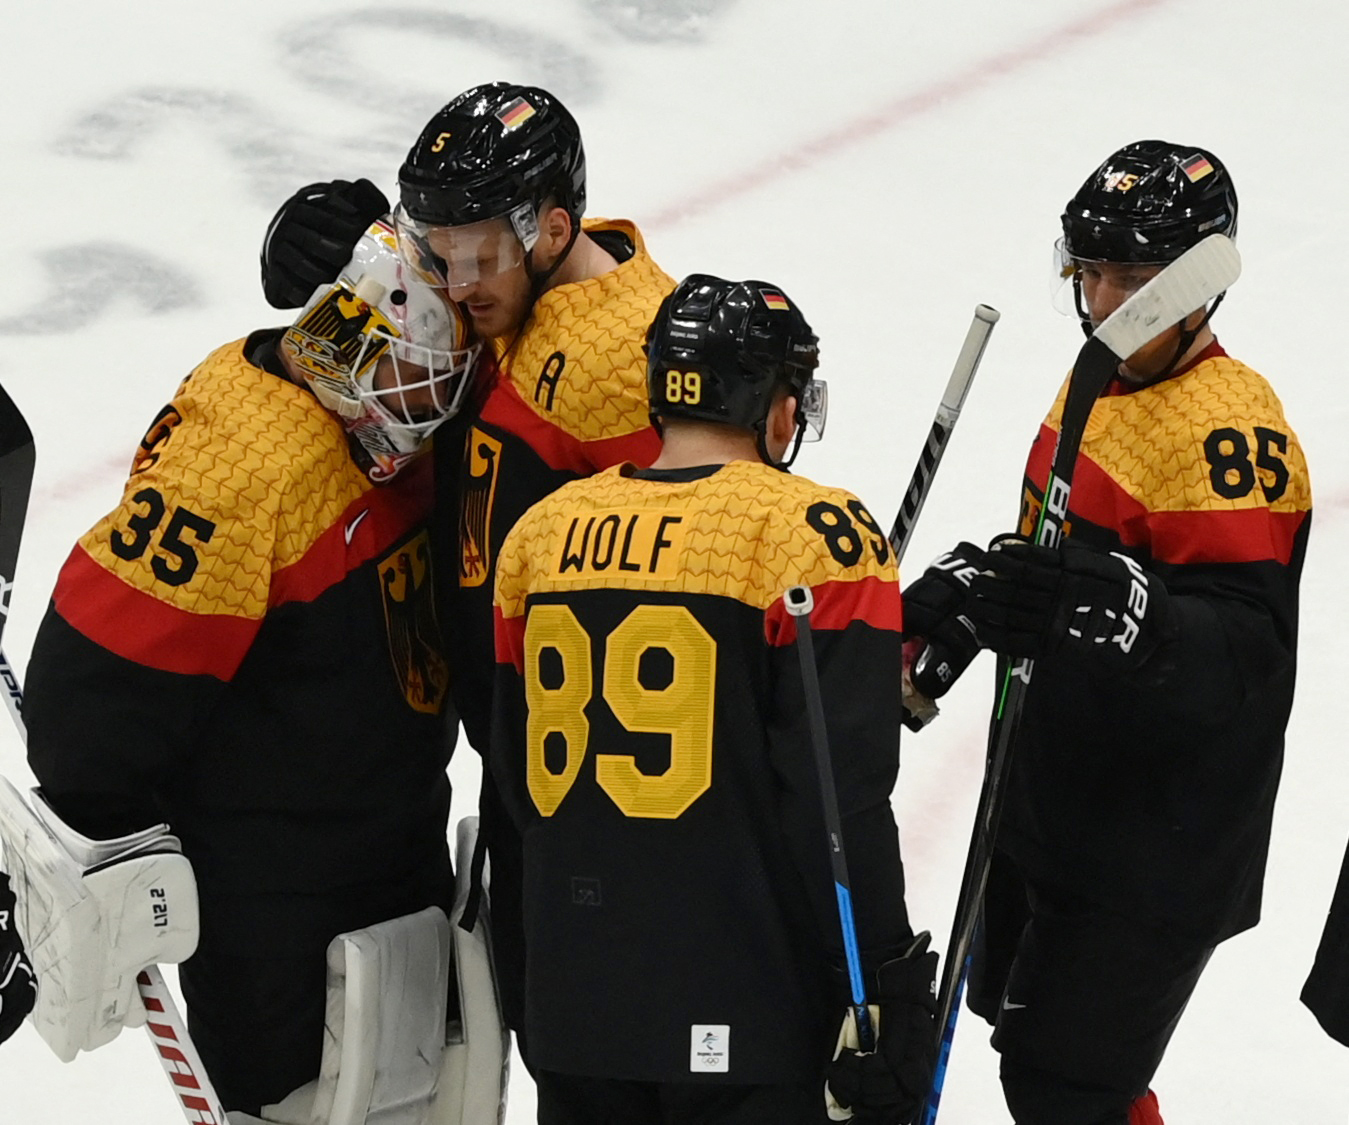 2022 Beijing Olympics - Ice Hockey - Men's Prelim. Round - Group A - Germany v China - National Indoor Stadium, Beijing, China - February 12, 2022. Germany players celebrate after the match. 